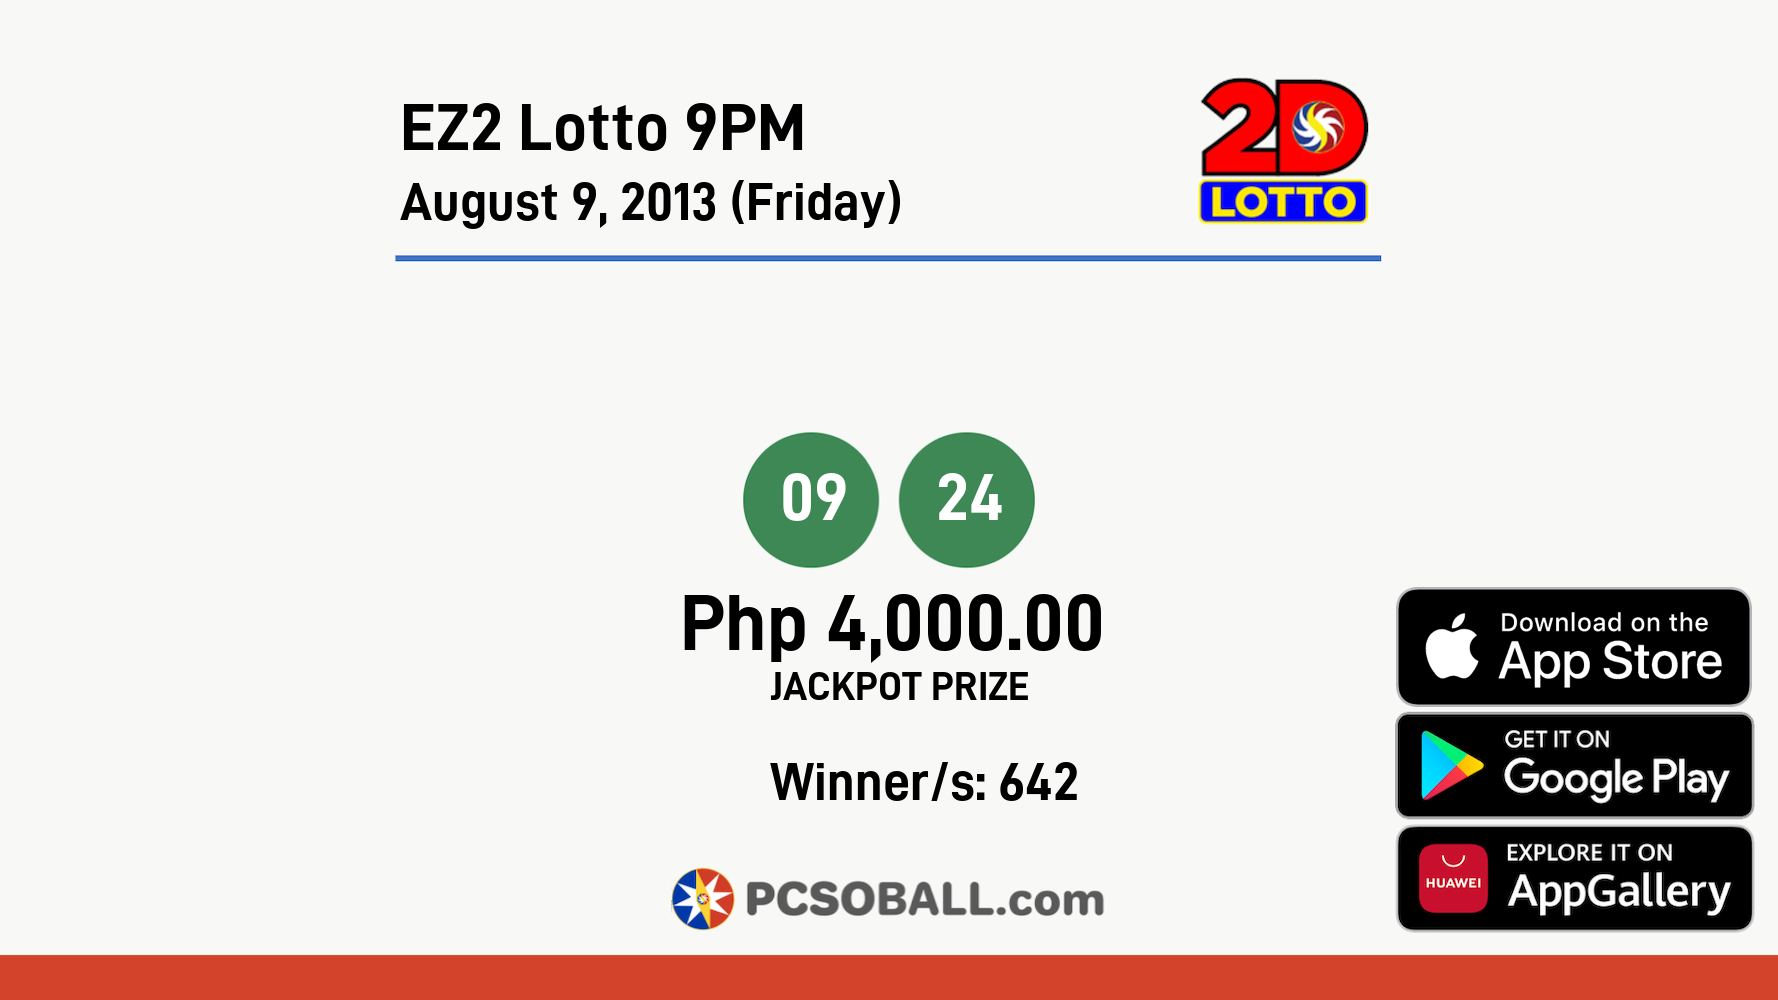 EZ2 Lotto 9PM August 9, 2013 (Friday) Result